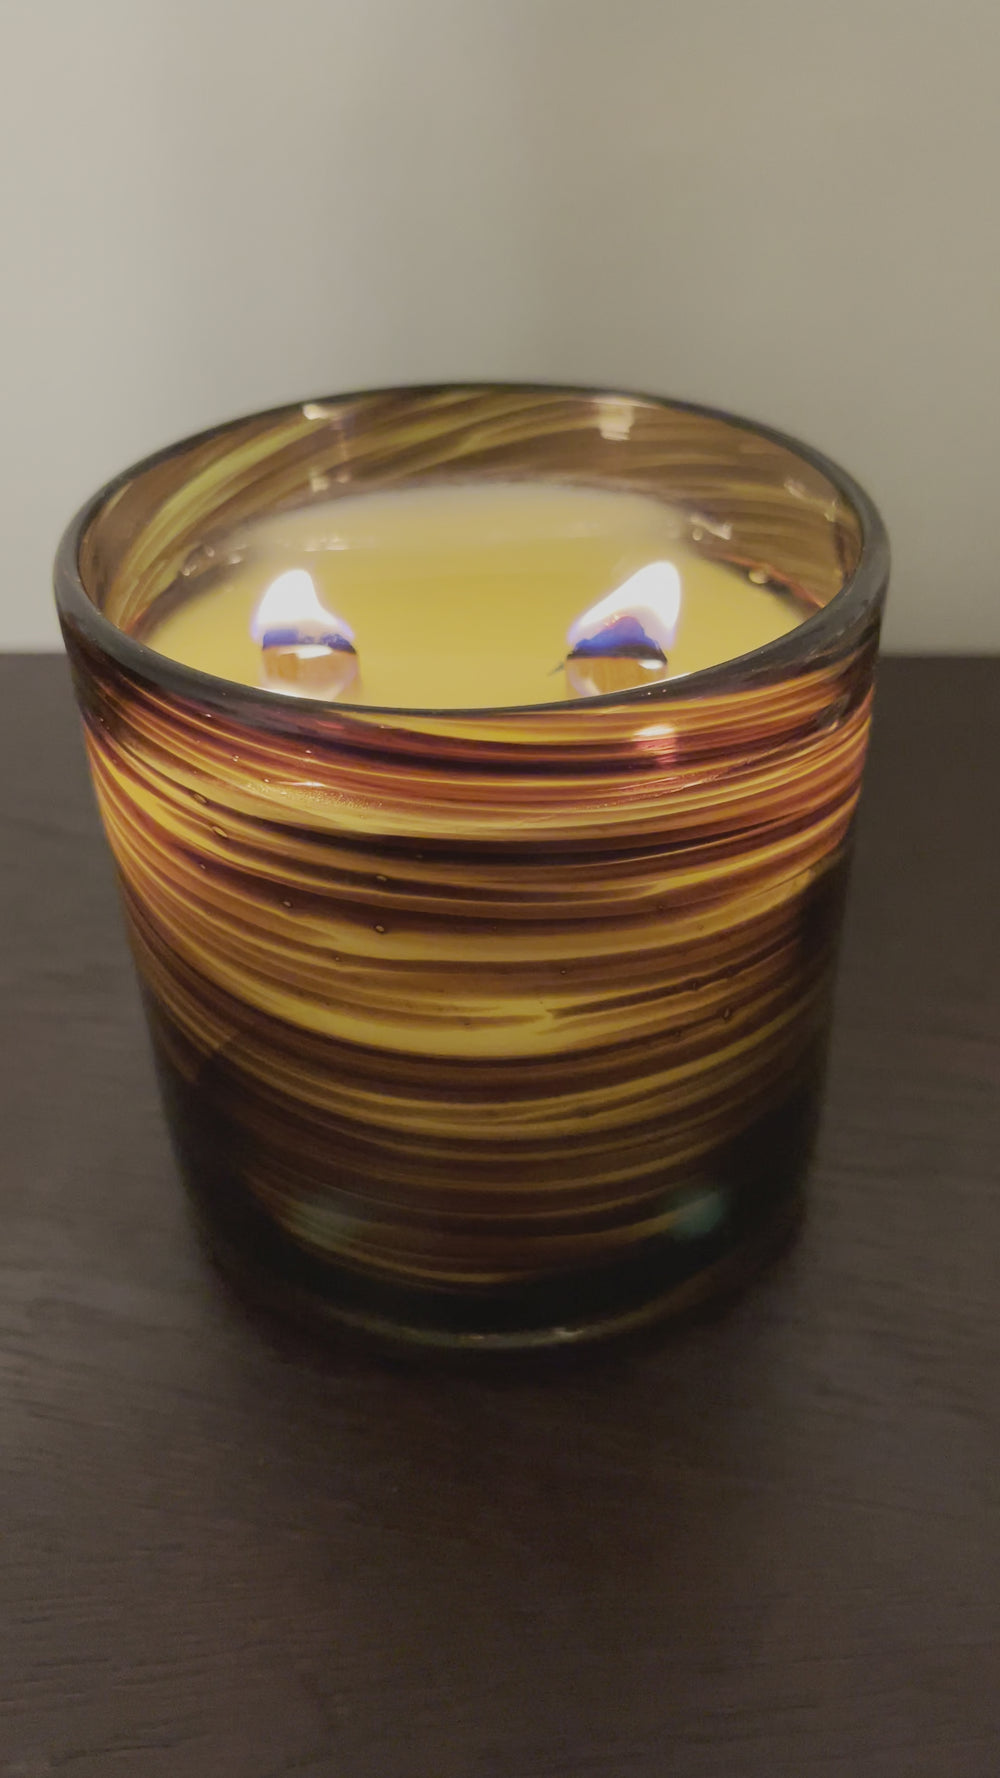 Good Soul Shop Handpoured Soy Clean Fragrance Double Wood Wick Candle Swirl Handblown glass